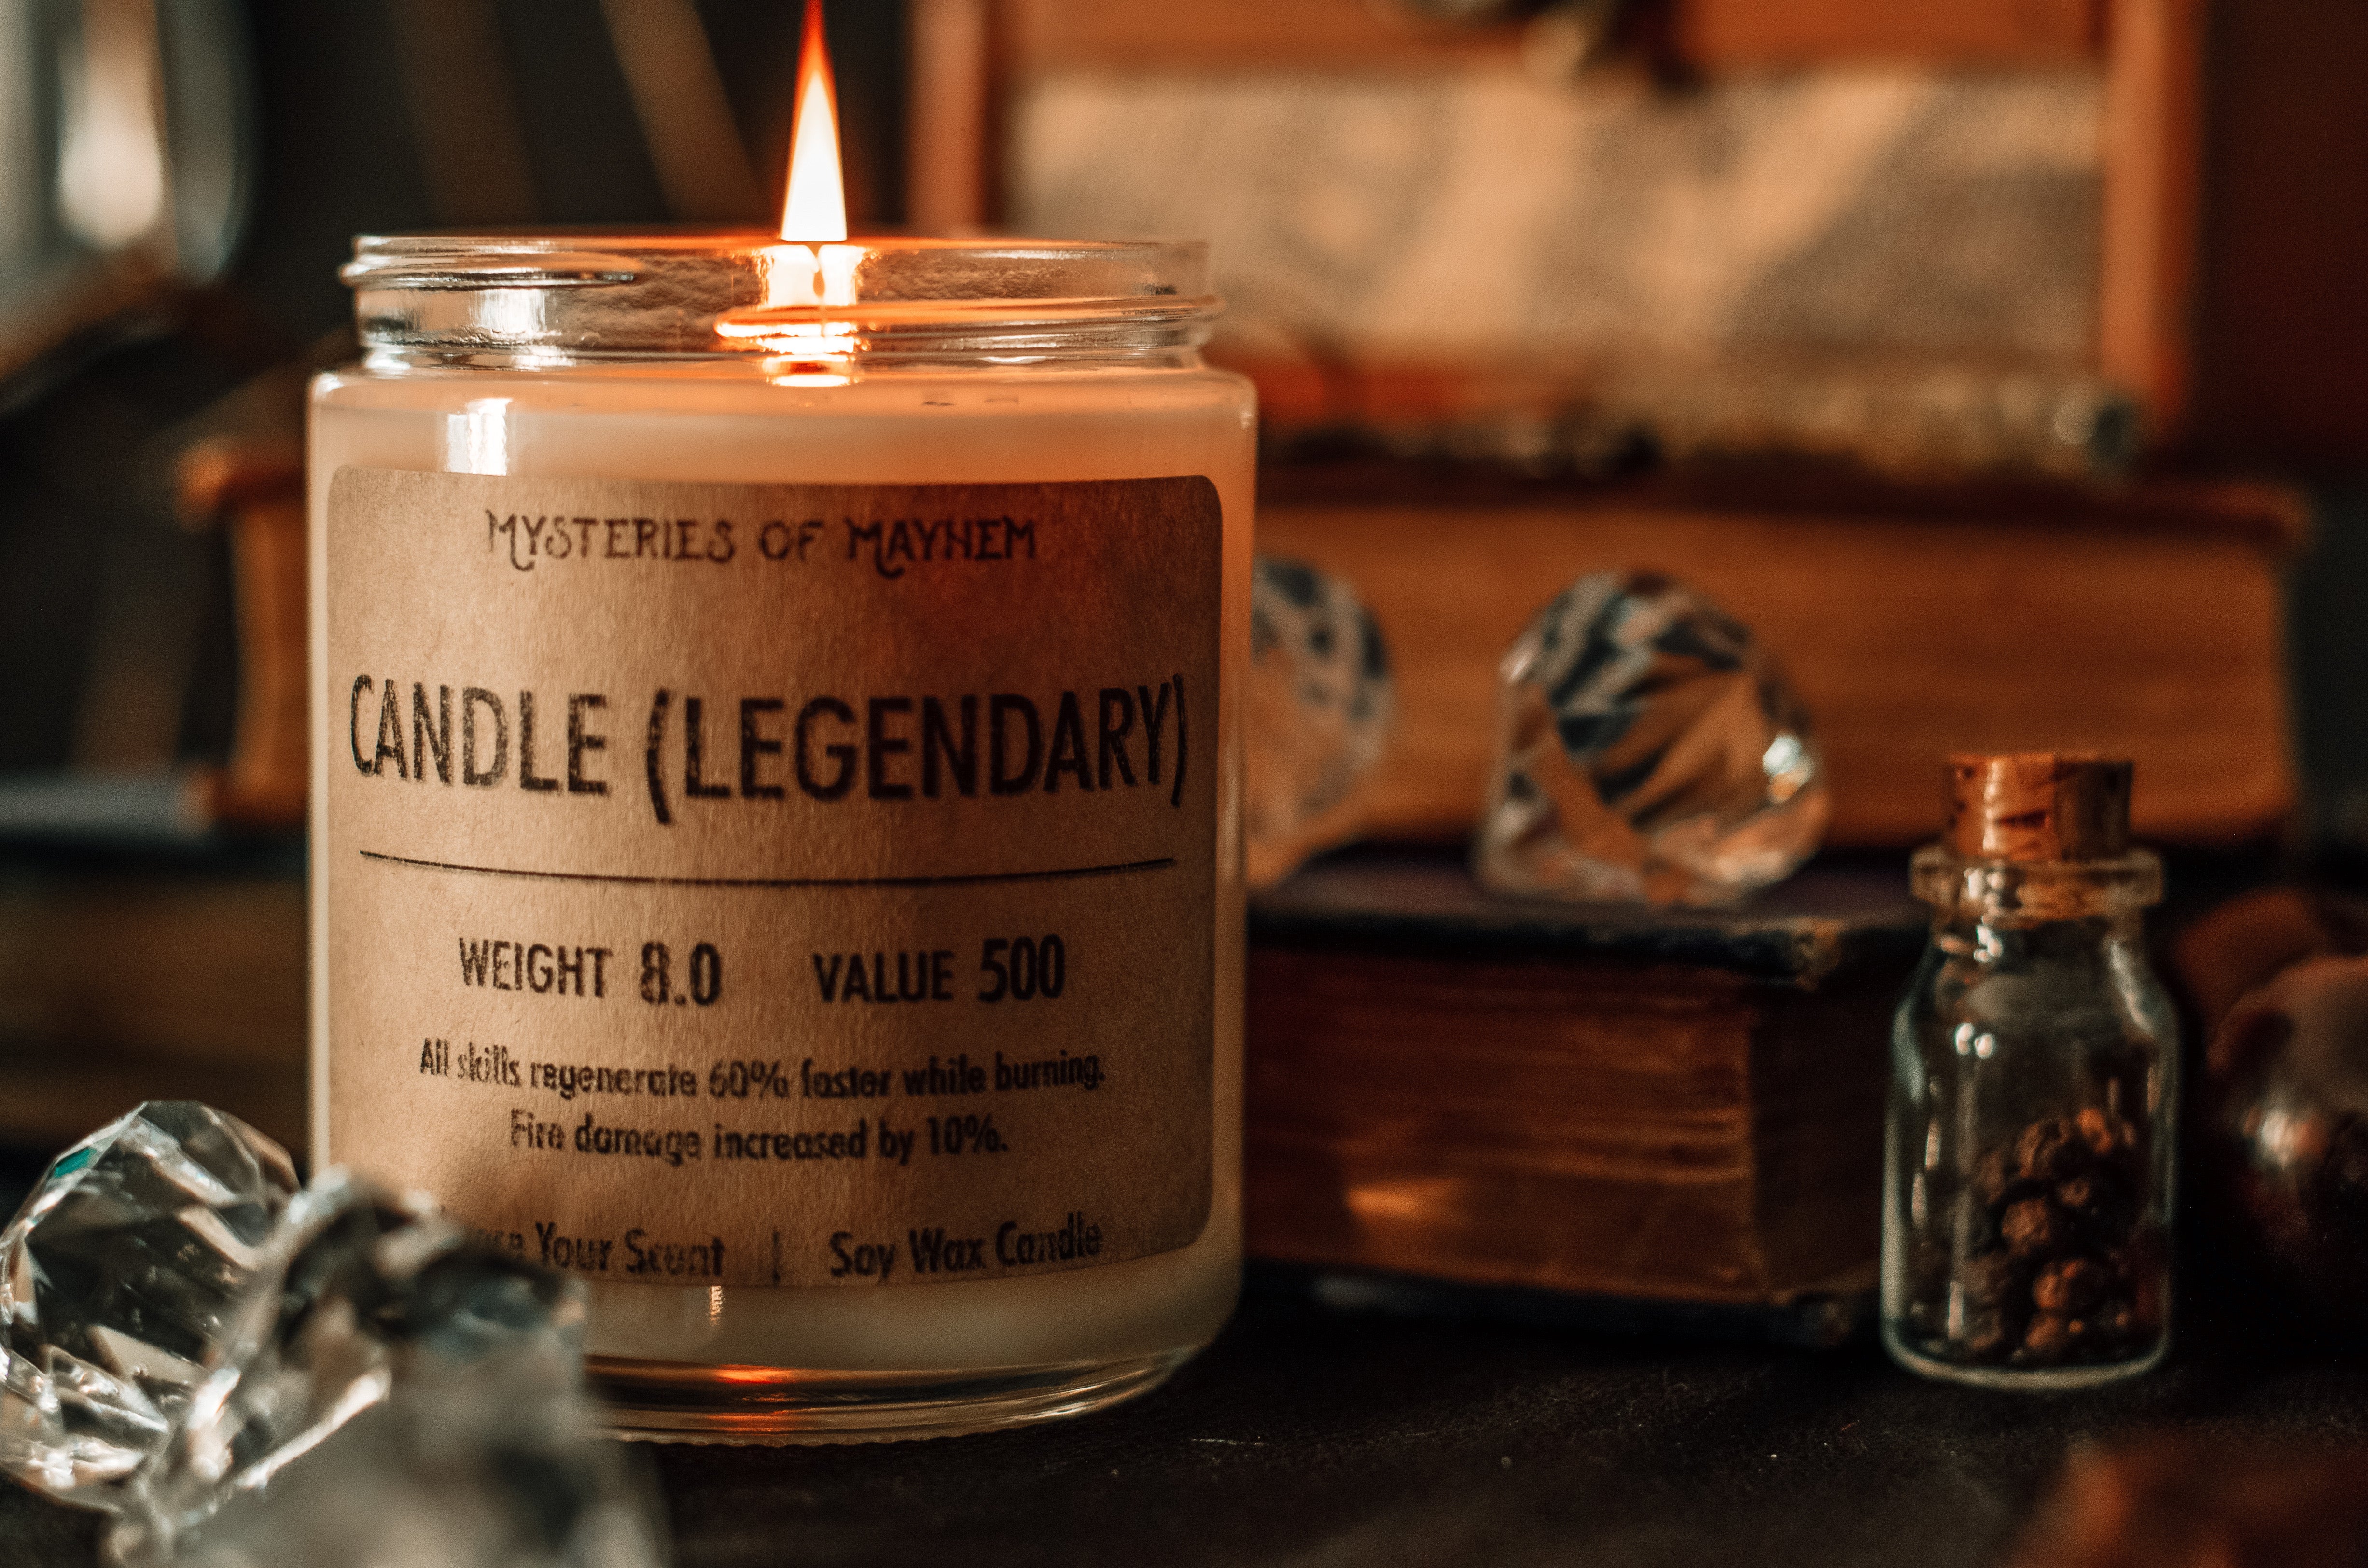 Candle (Legendary) - Choose Your Scent